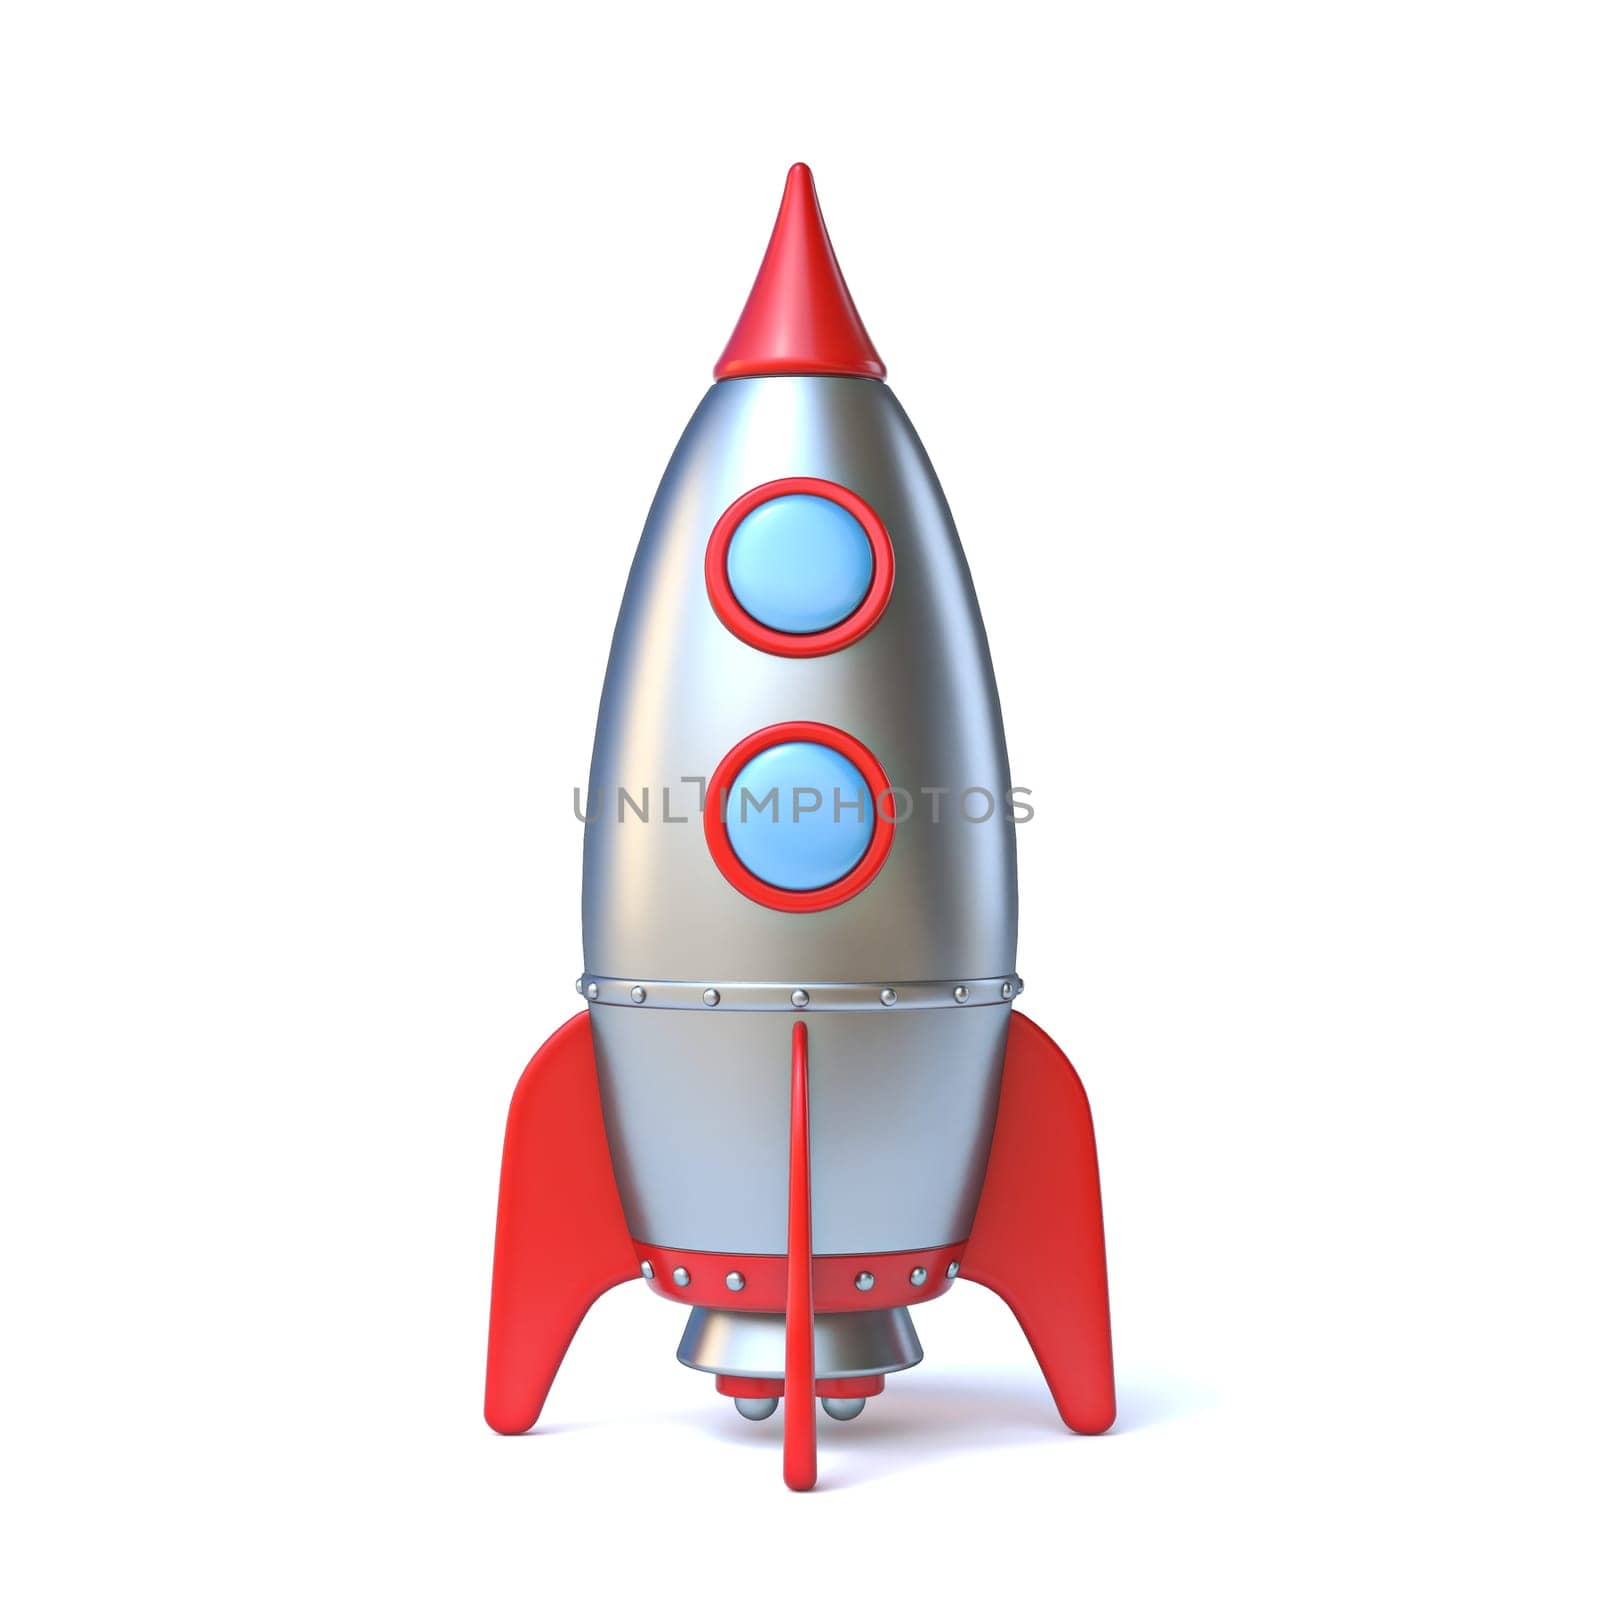 Space rocket toy 3D rendering illustration isolated on white background